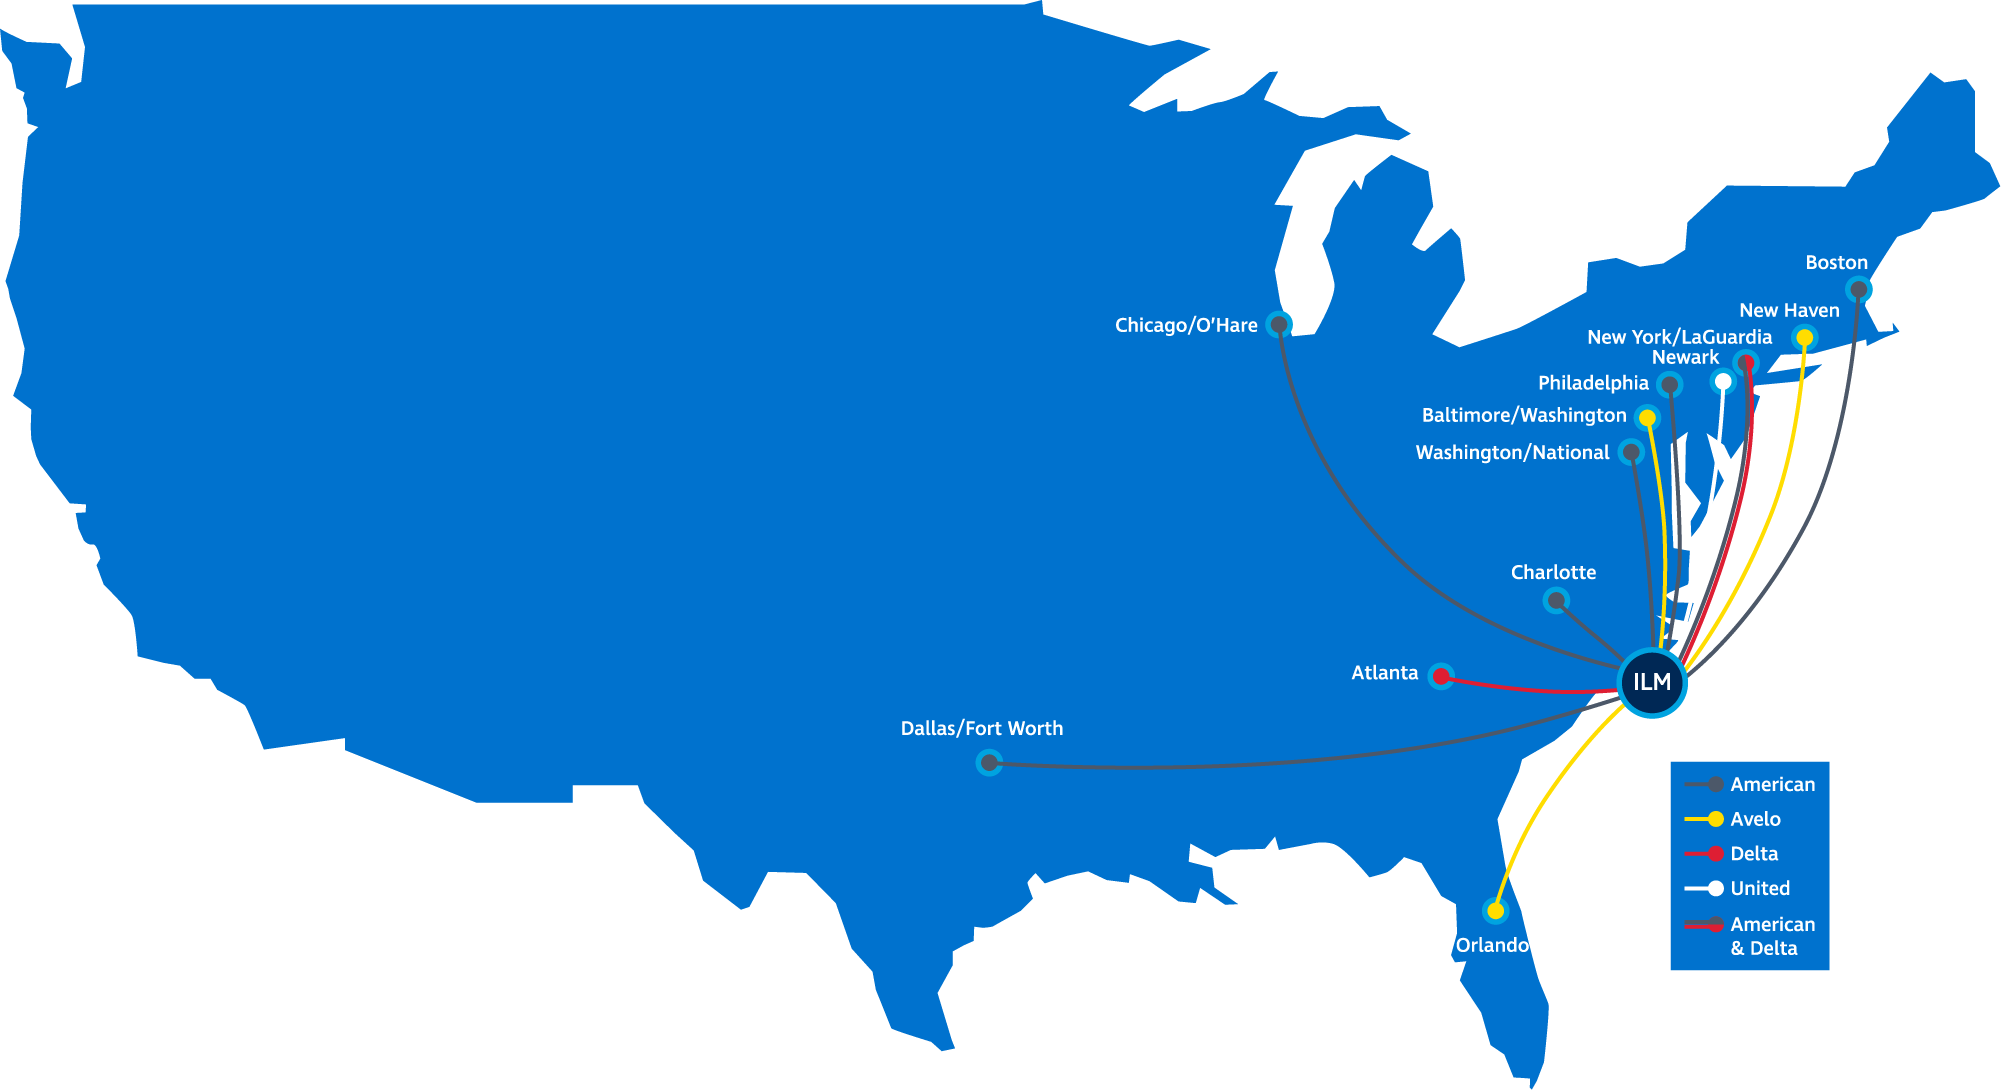 Map of United States with non-stop destinations